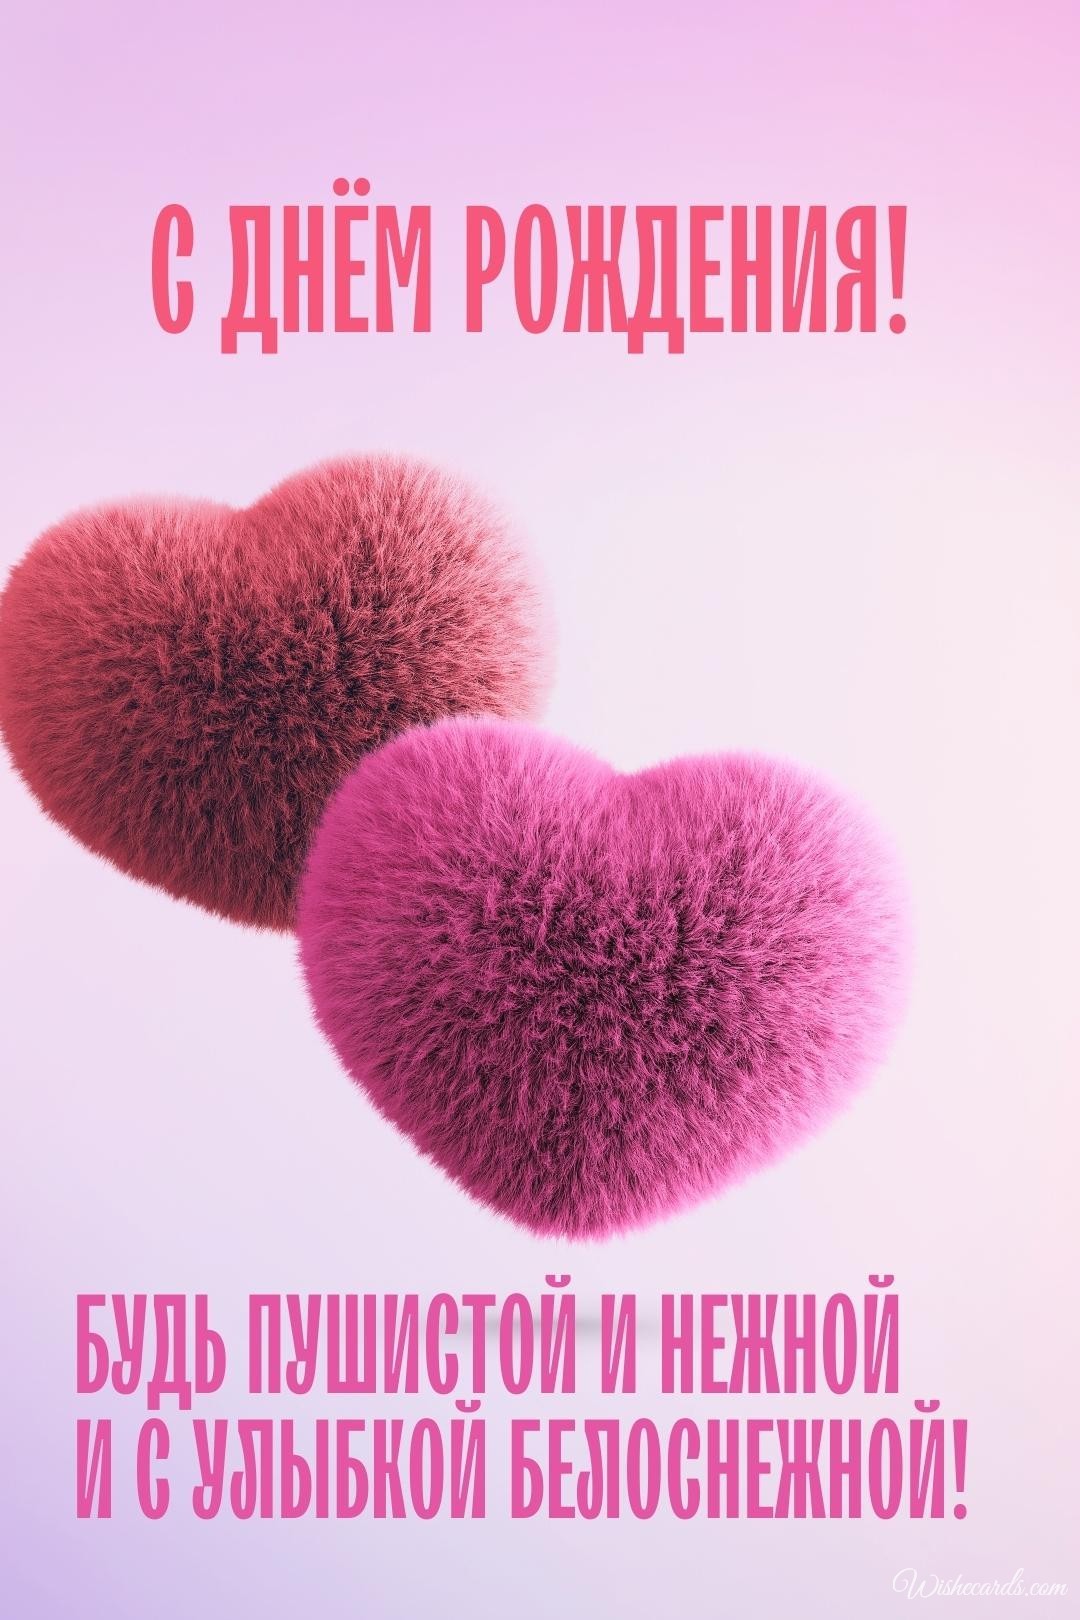 Russian Birthday Digital Card For Her